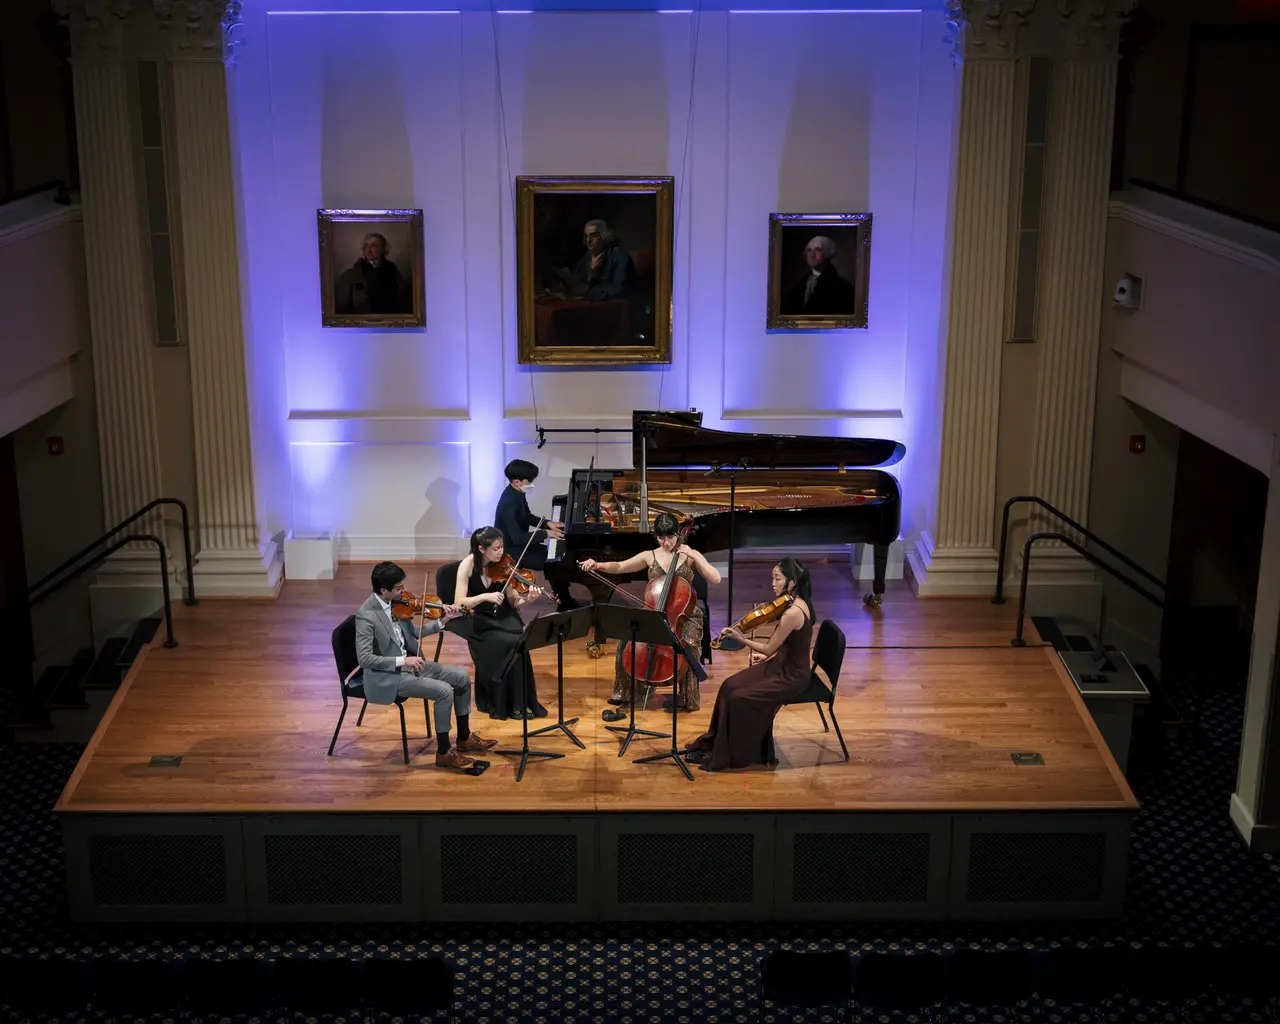 An ensemble of five classical musicans perform on an intimate stage.